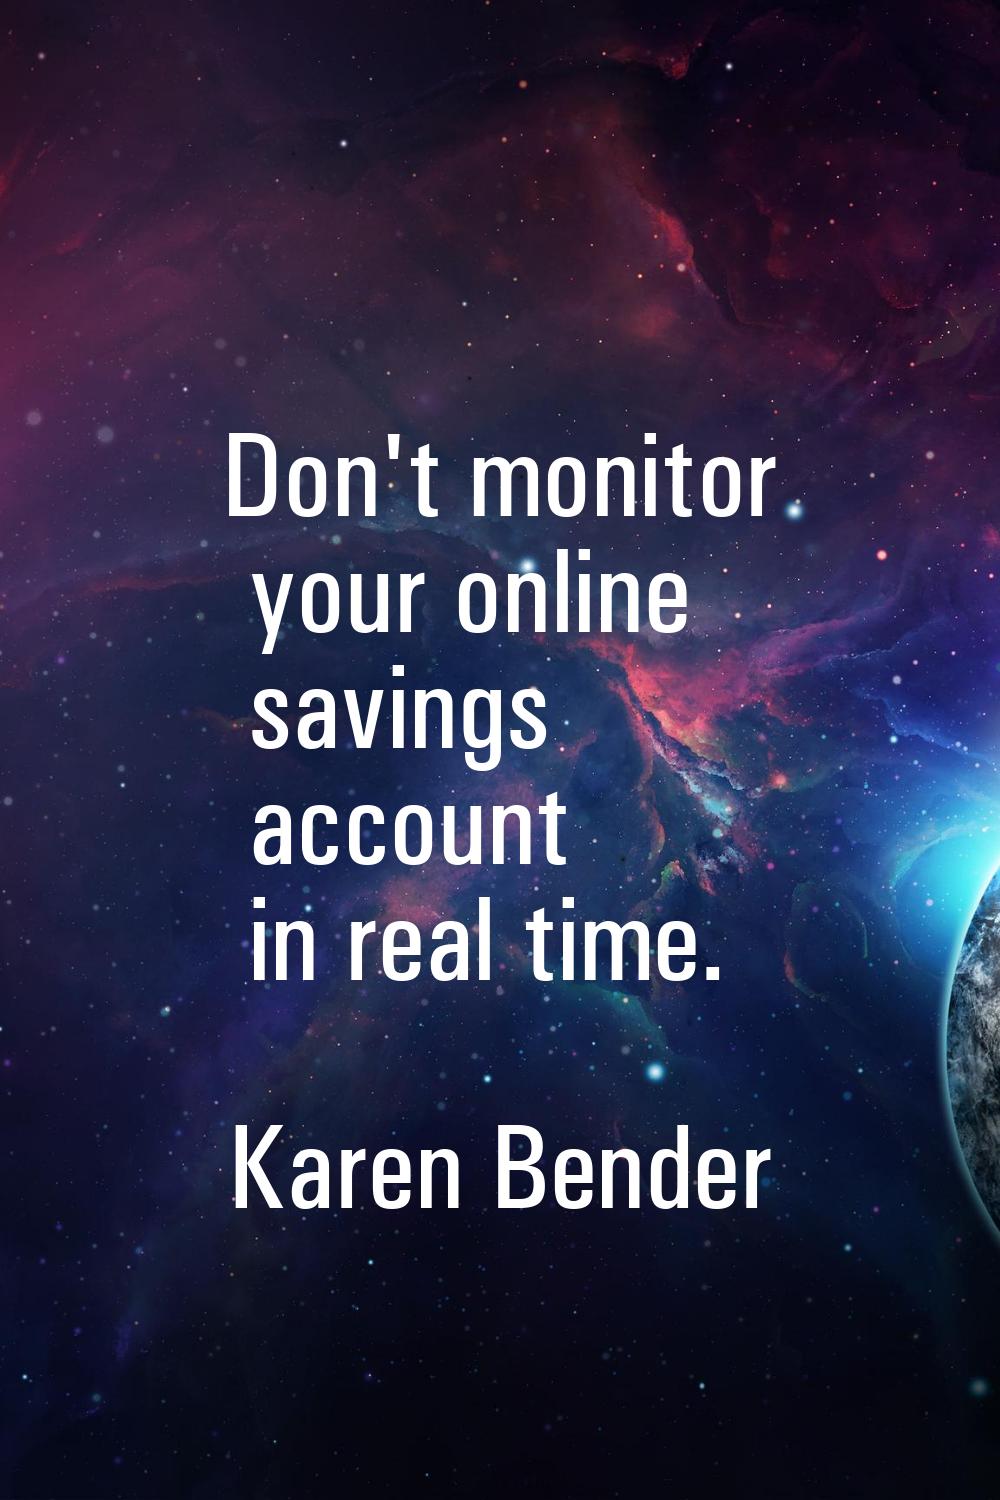 Don't monitor your online savings account in real time.